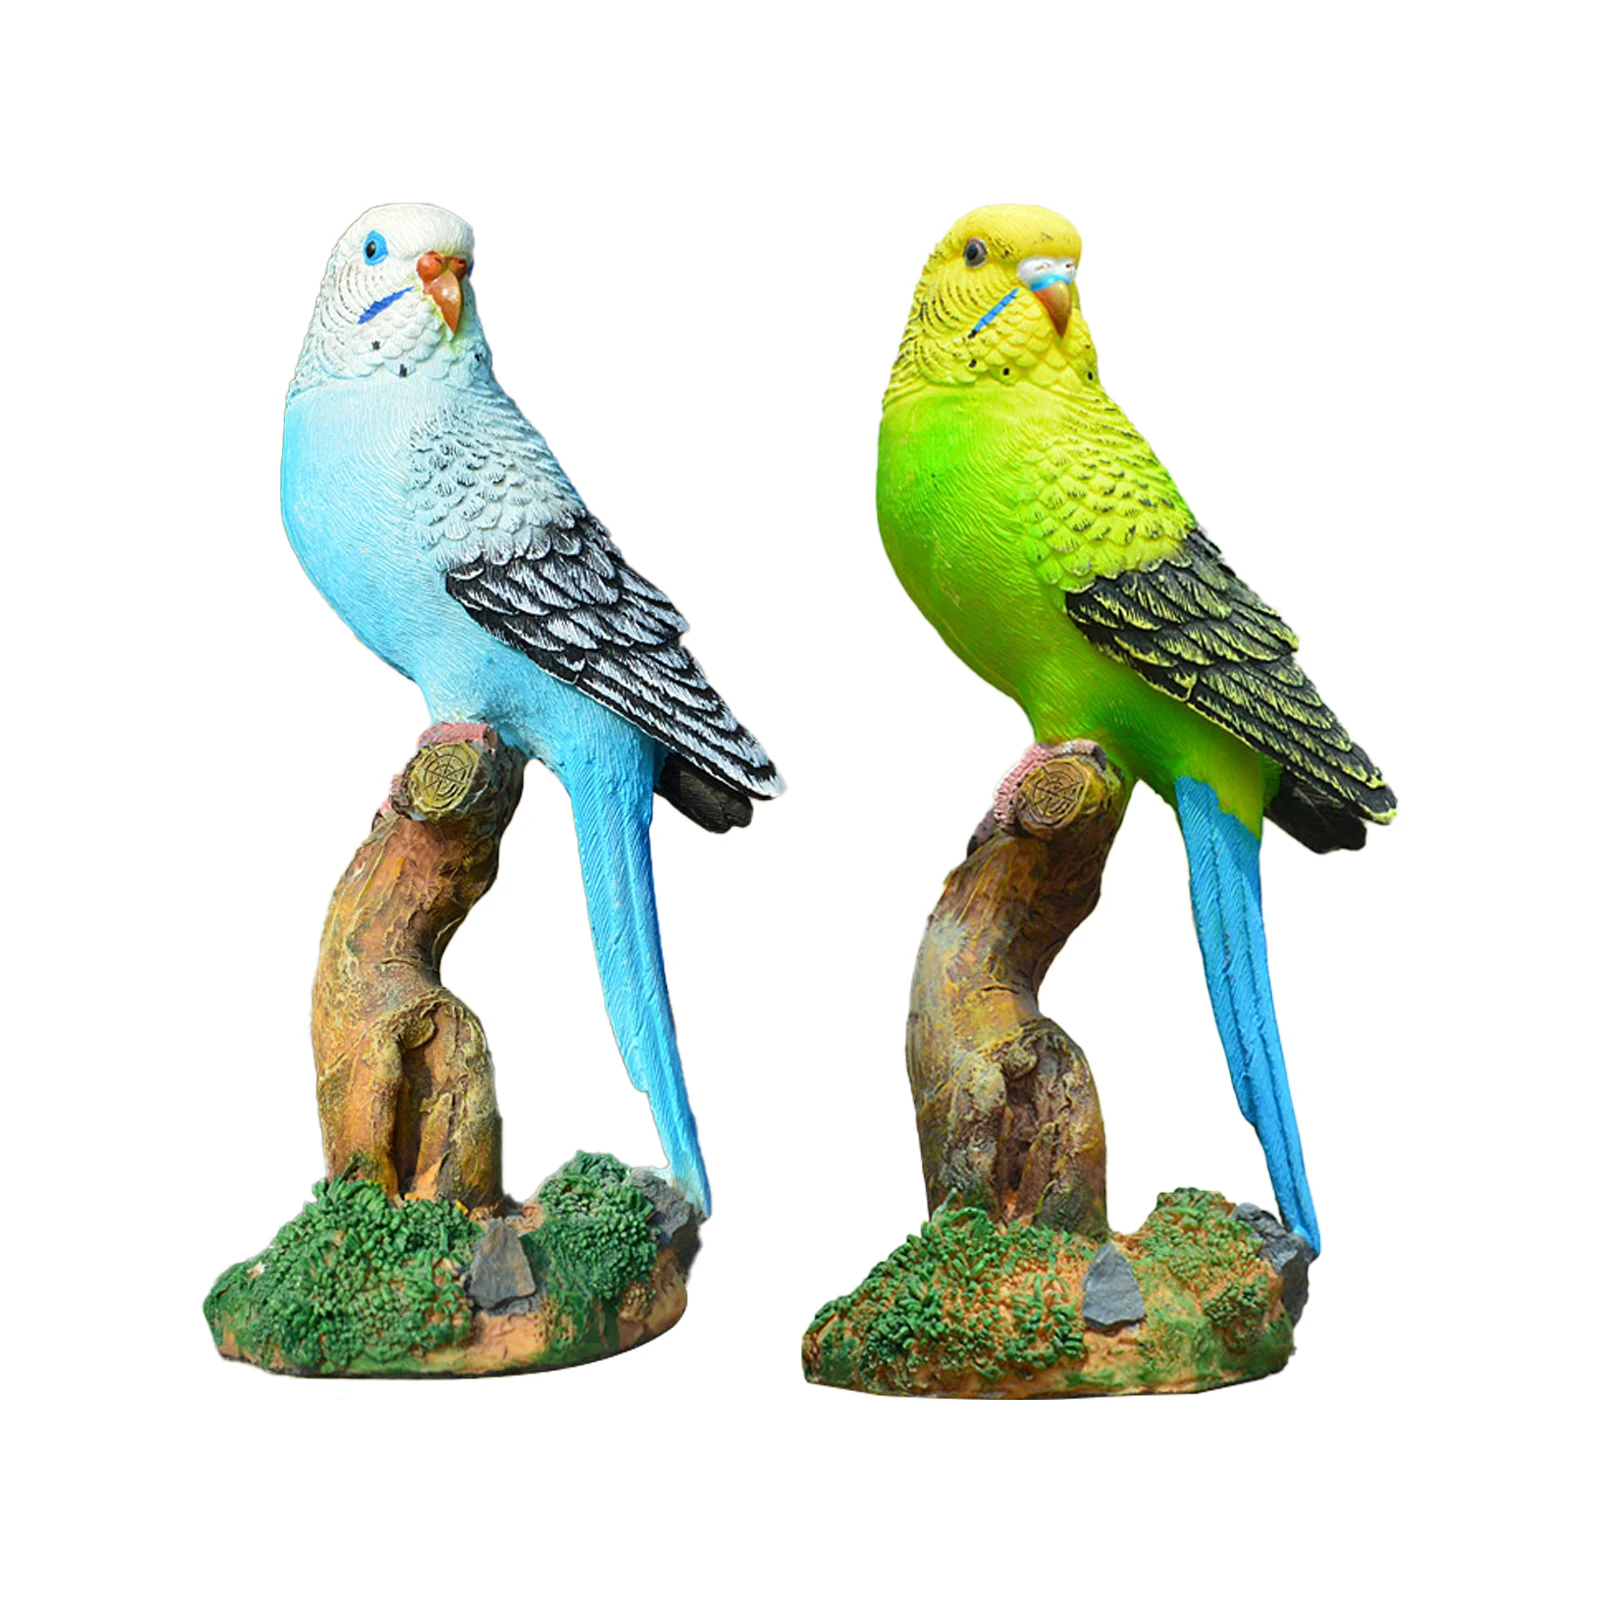 

2pcs Outdoor Colorful Lifelike Yard Standing On Tree Garden Decor Birds Lovers Bright Tropical Lawn Parrot Statues Patio